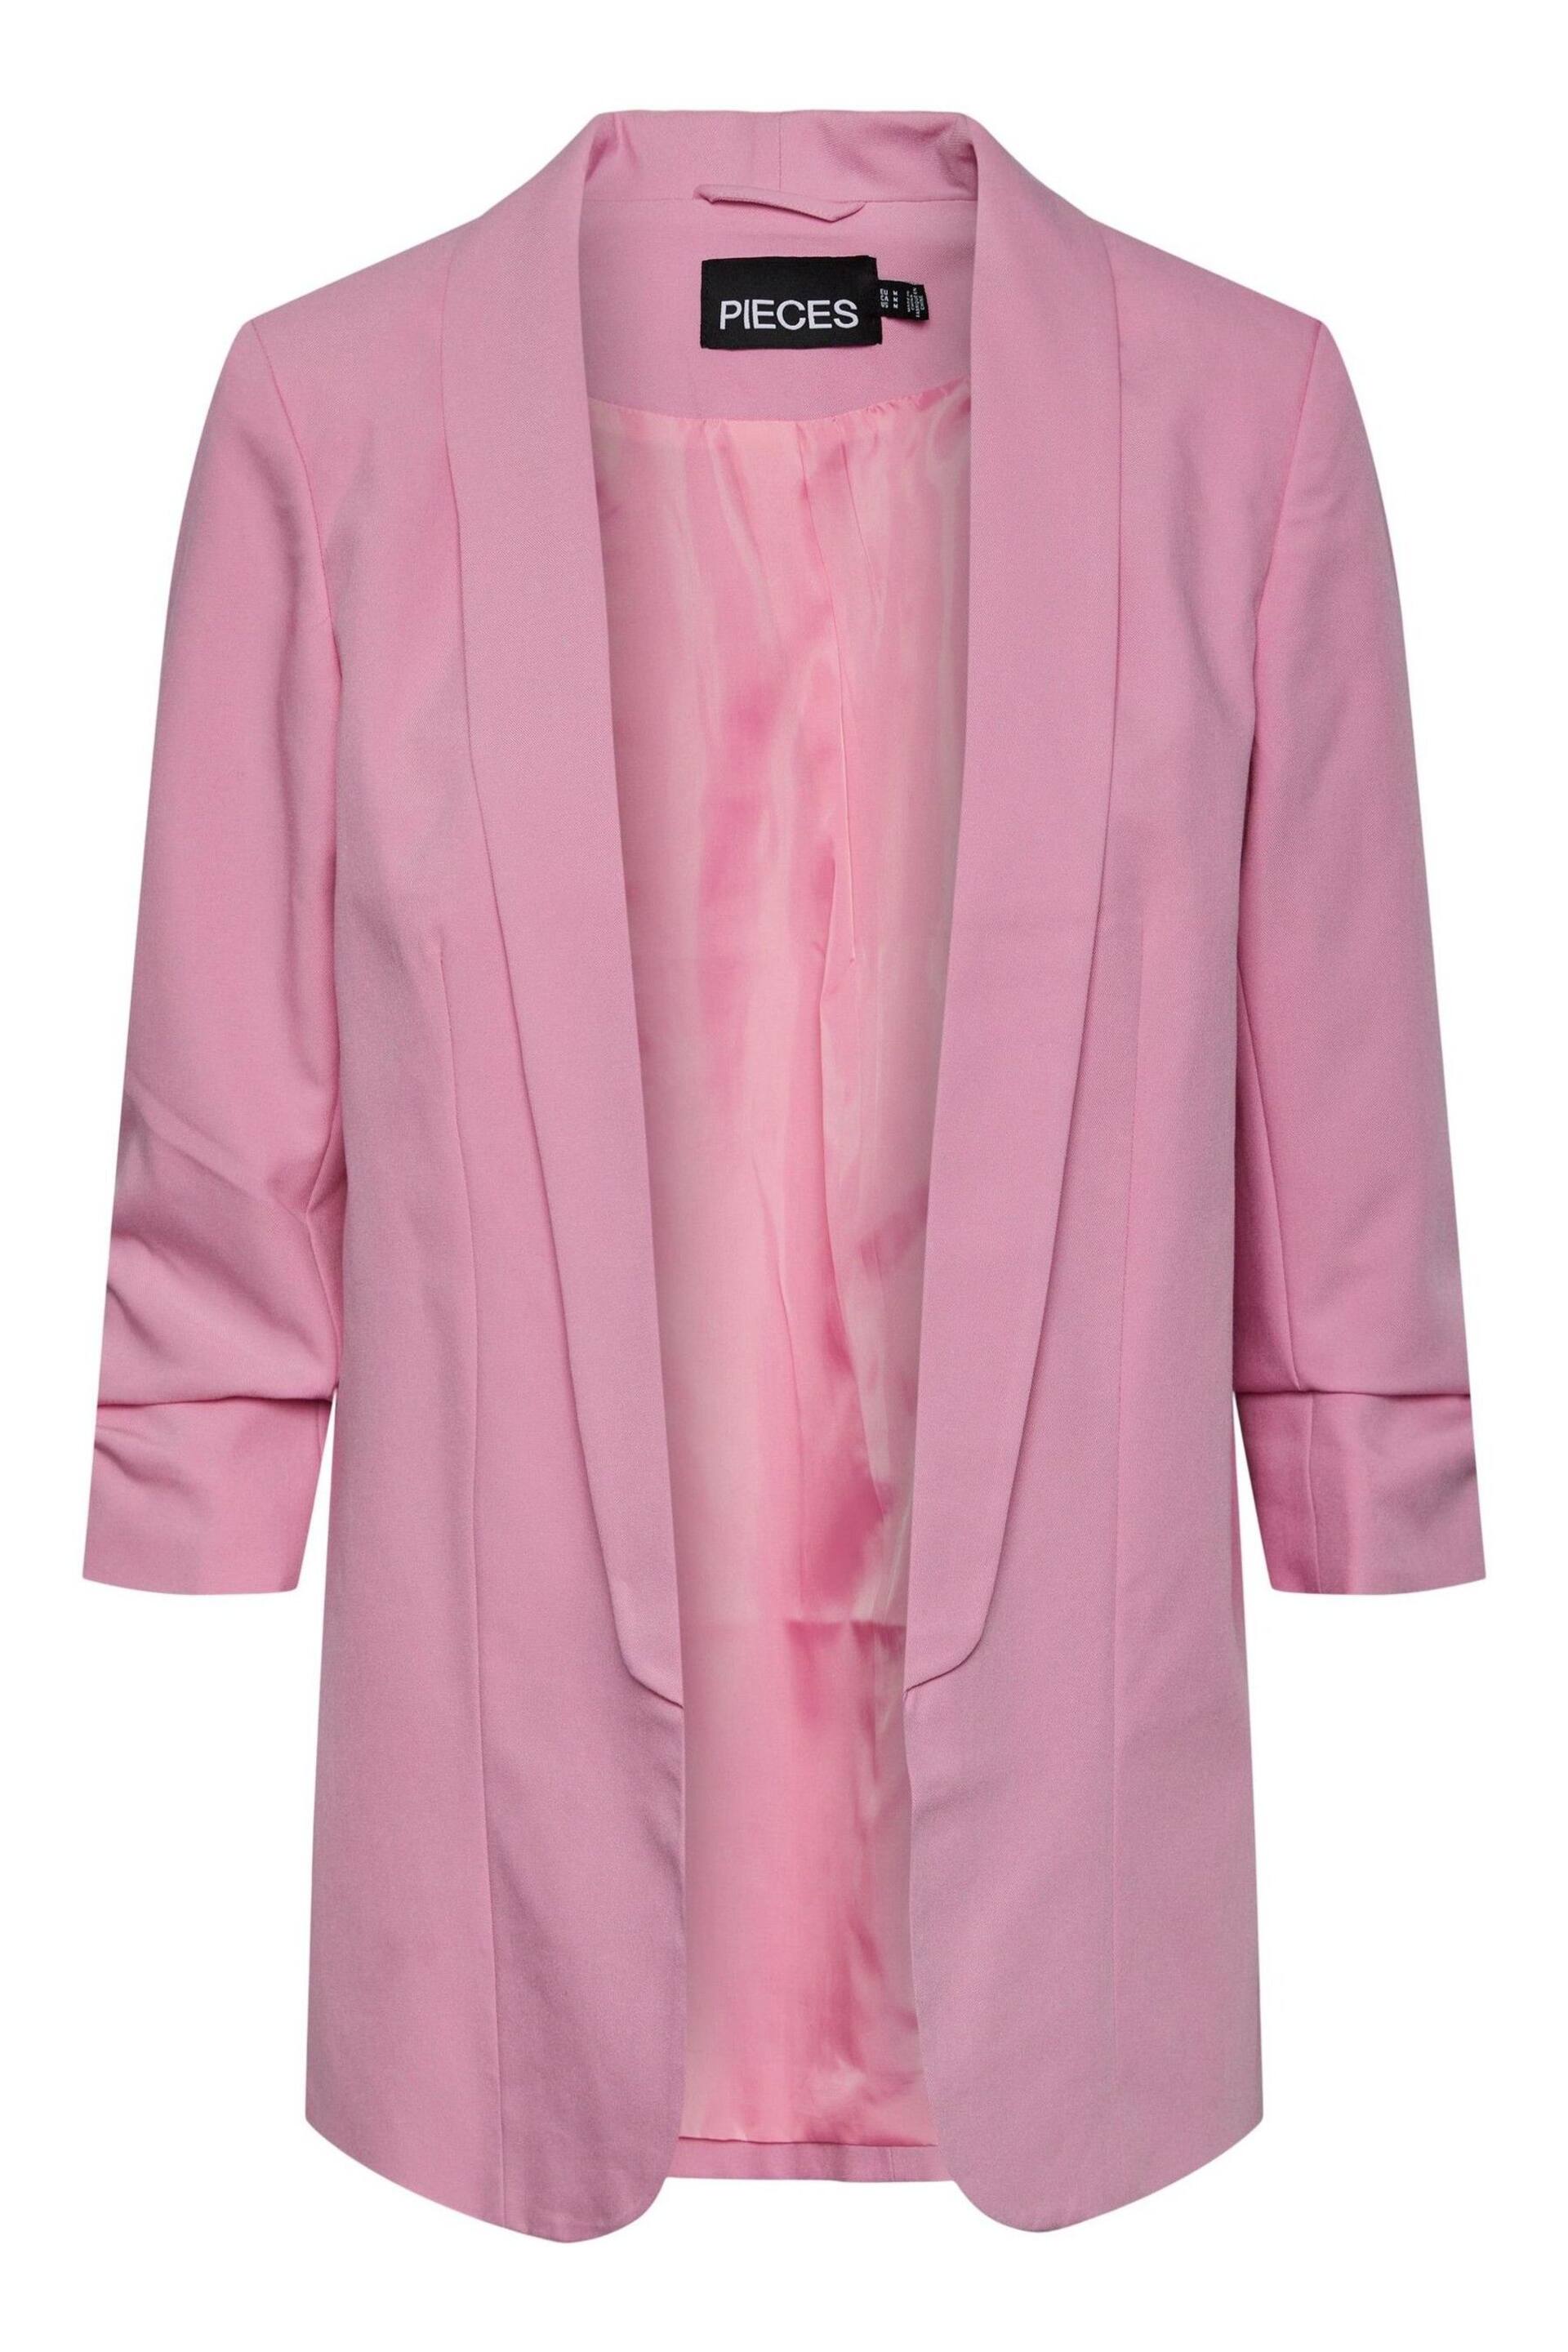 Pieces Pastel Pink Relaxed Ruched Sleeve Workwear Blazer - Image 5 of 5